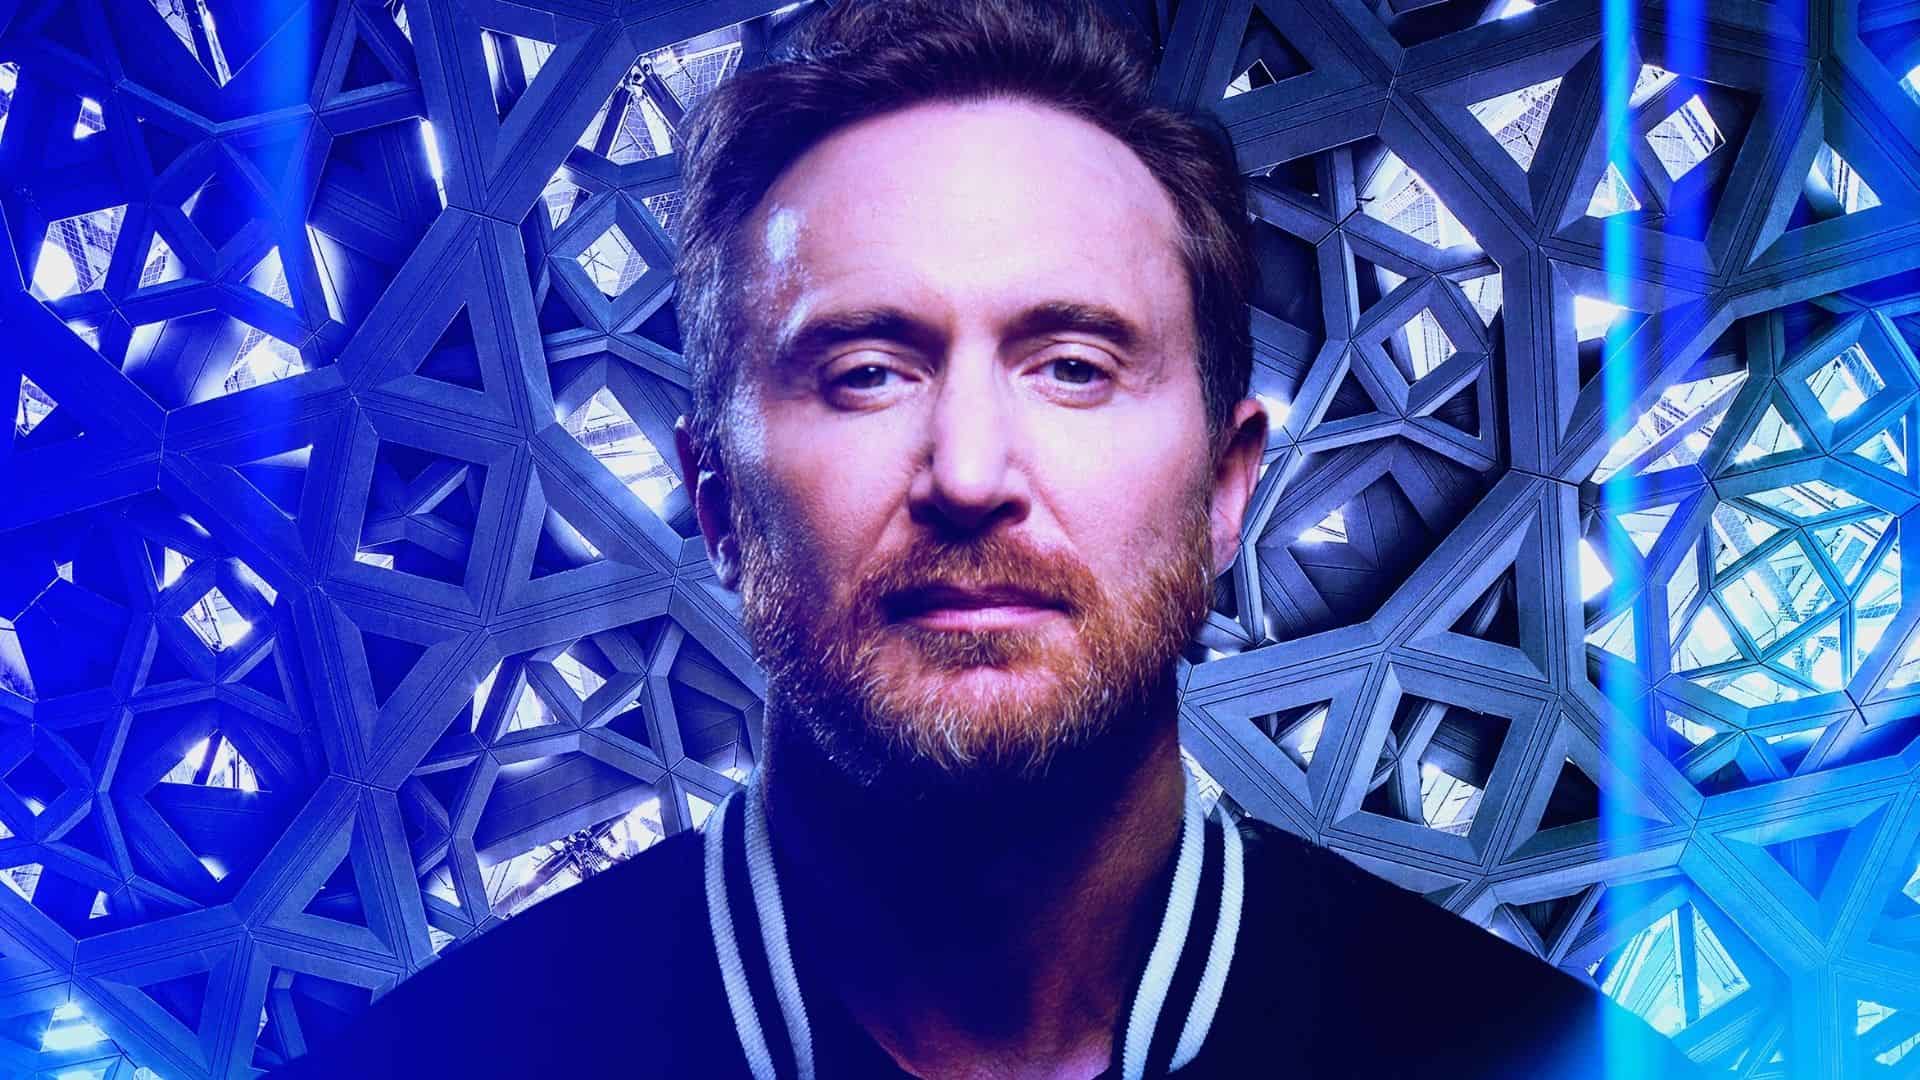 David Guetta set to perform virtually within the Roblox gaming community